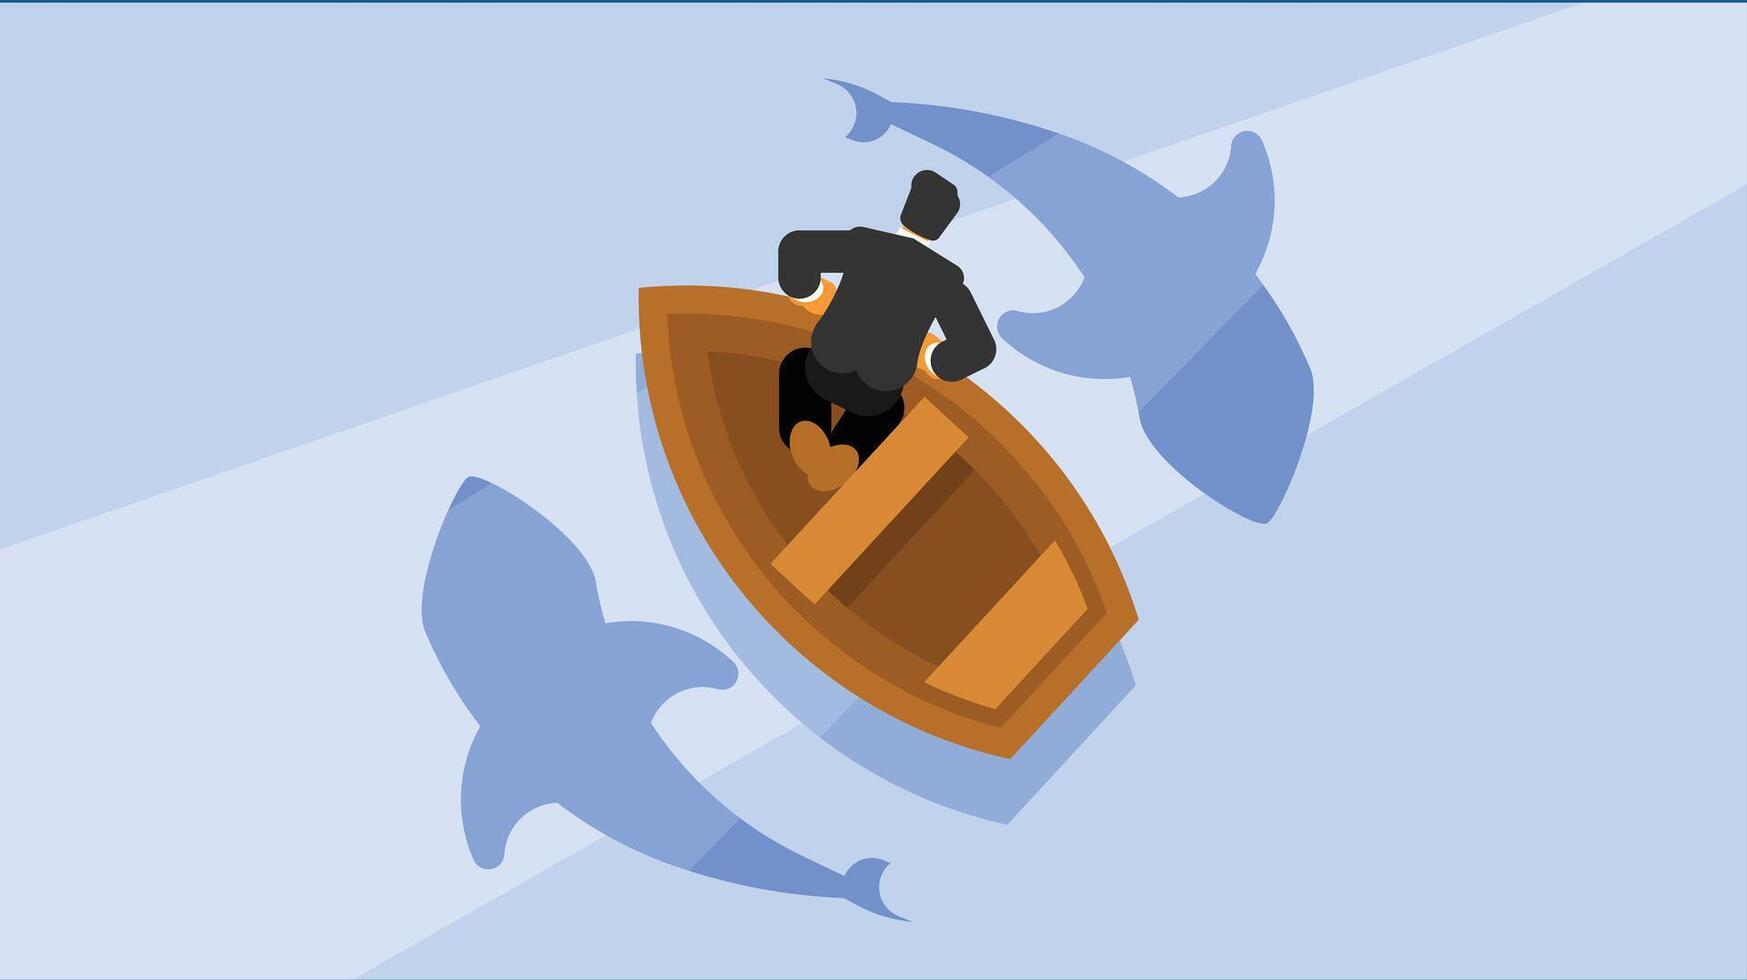 business man in a boat with sharks around the boat vector illustration